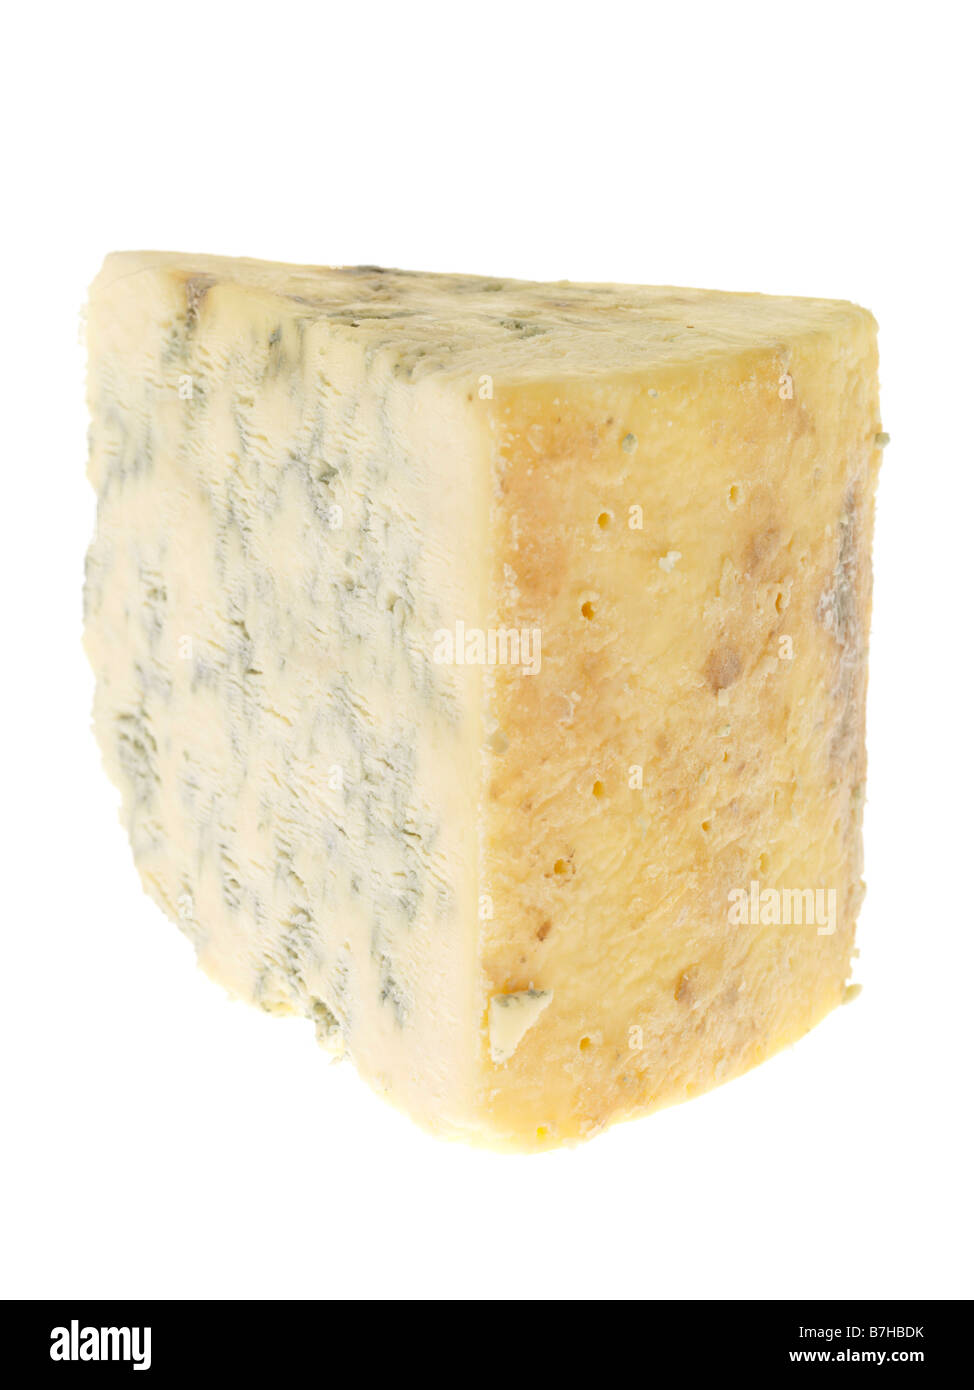 Fresh Strong Aromatic Blue Stilton Cheese Isolated Against A White Background With No People And A Clipping Path Stock Photo